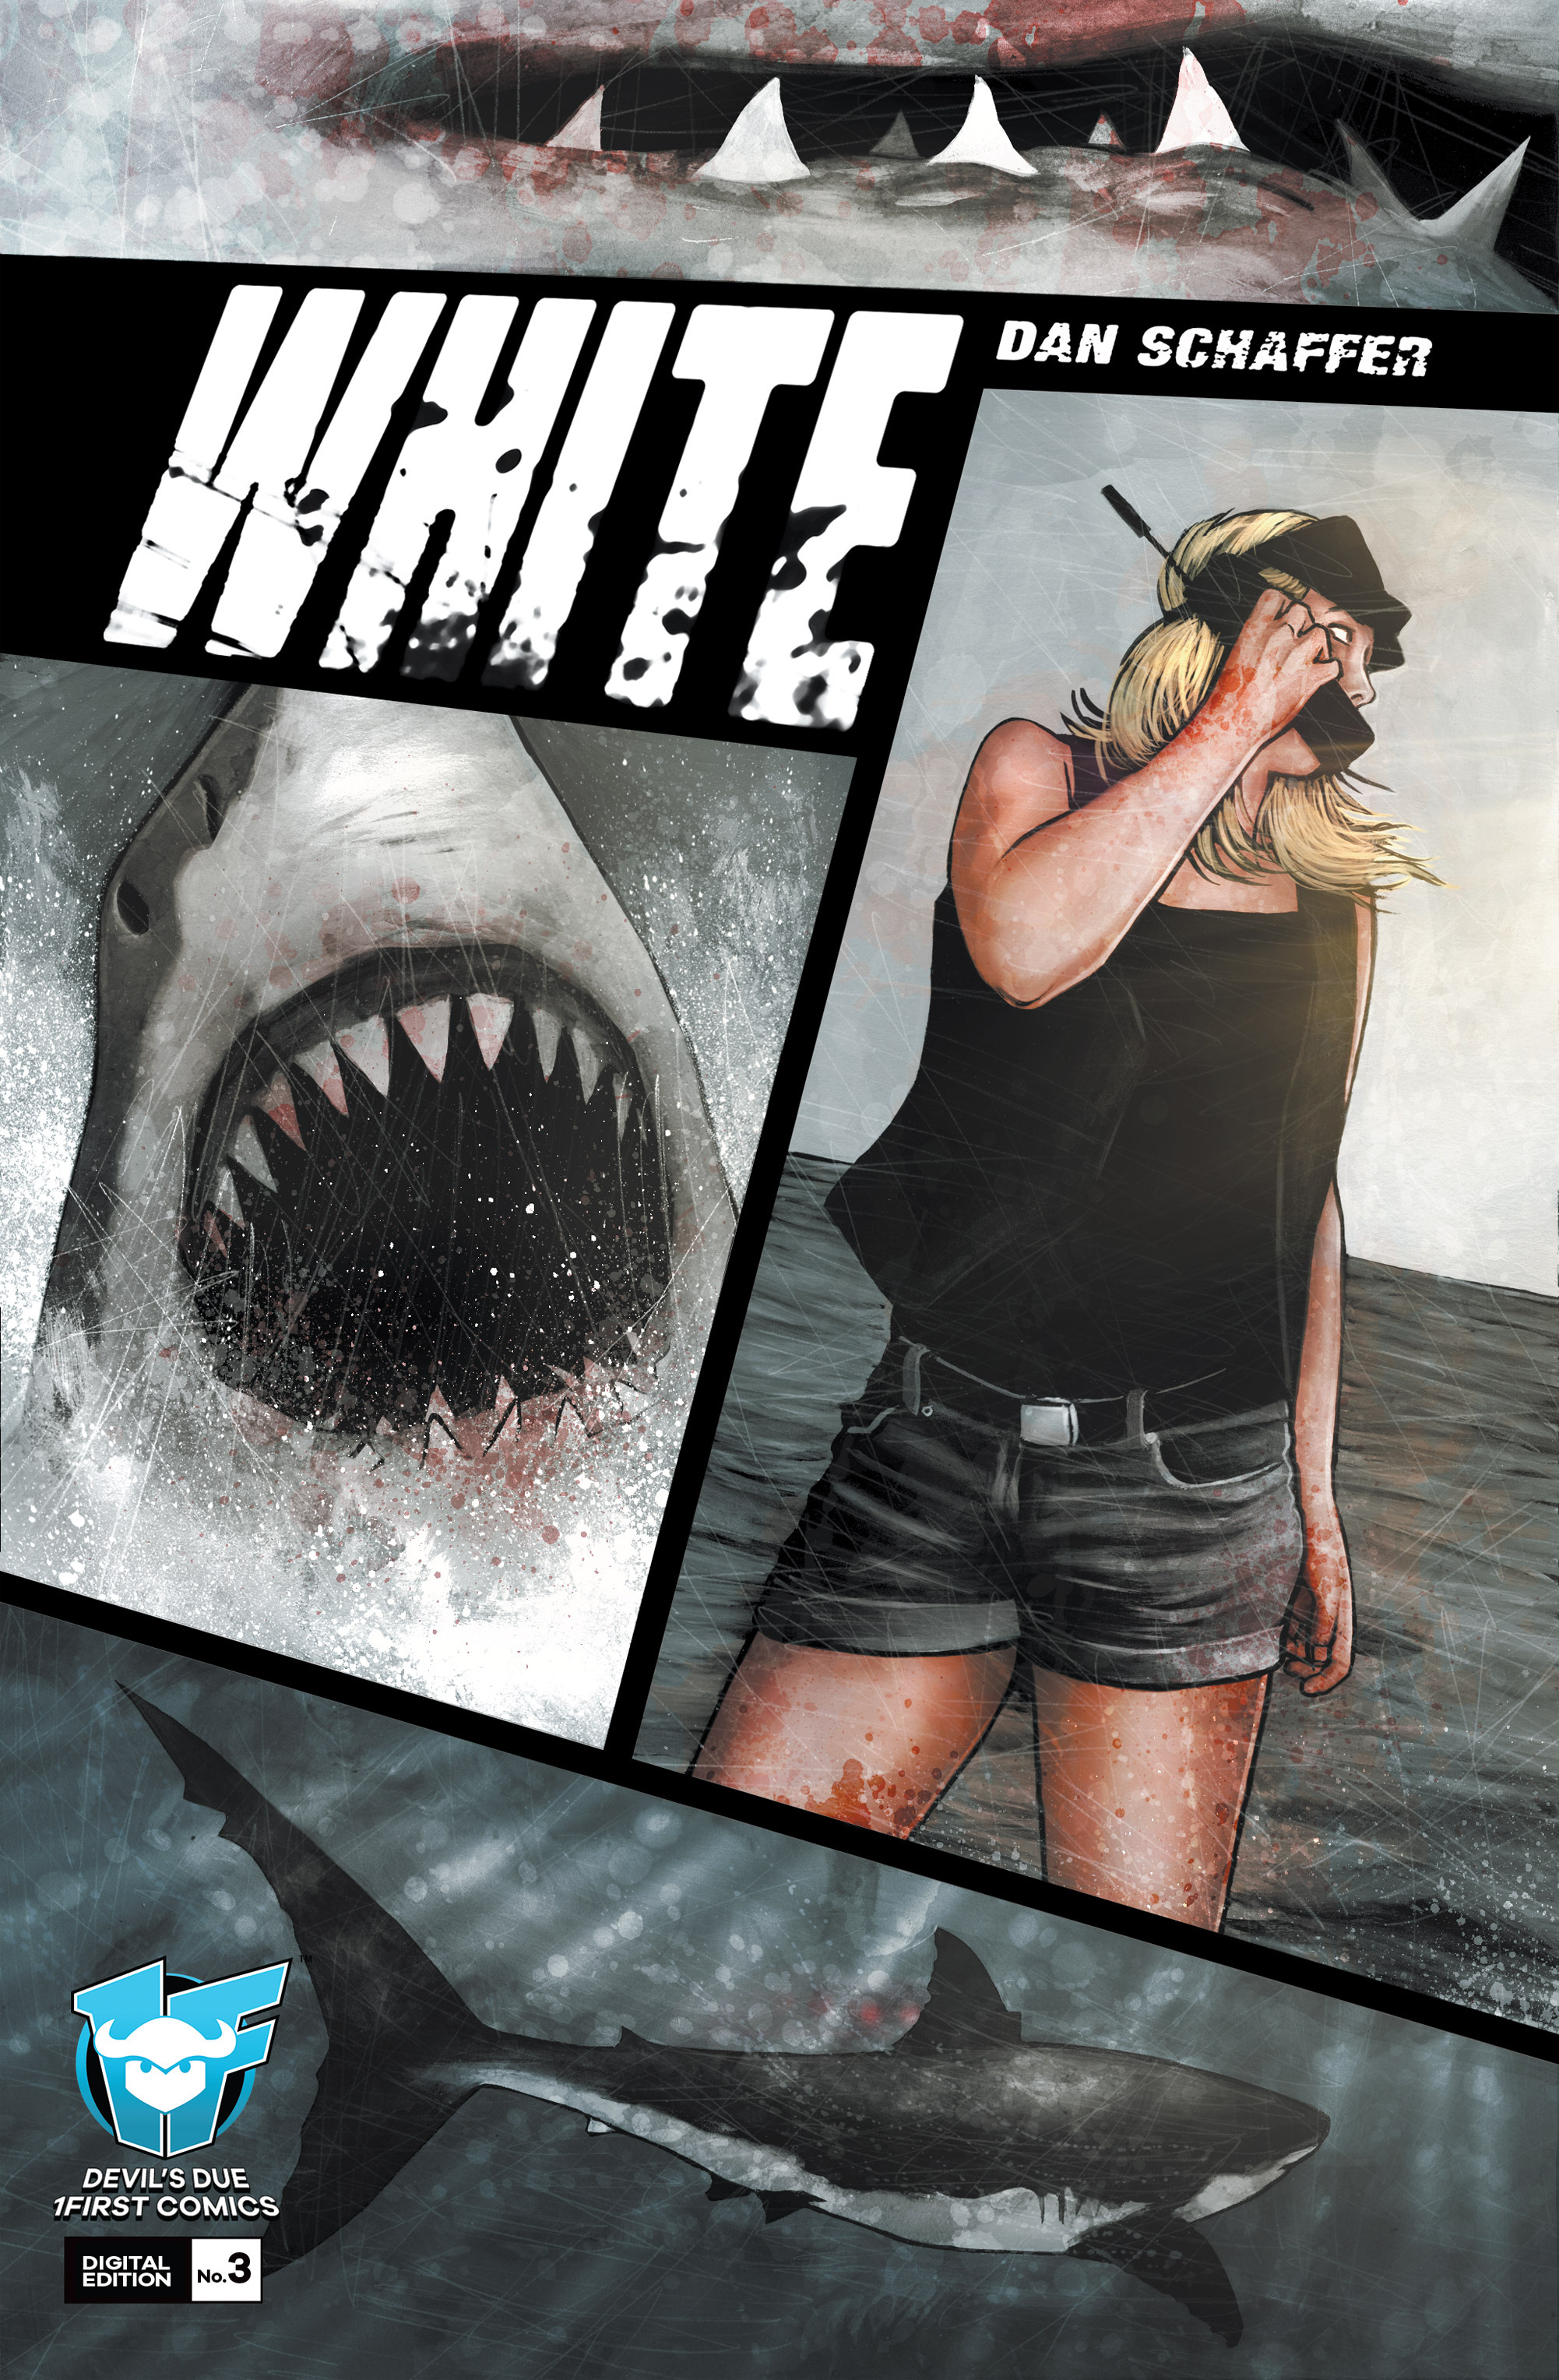 Read online White comic -  Issue #3 - 1